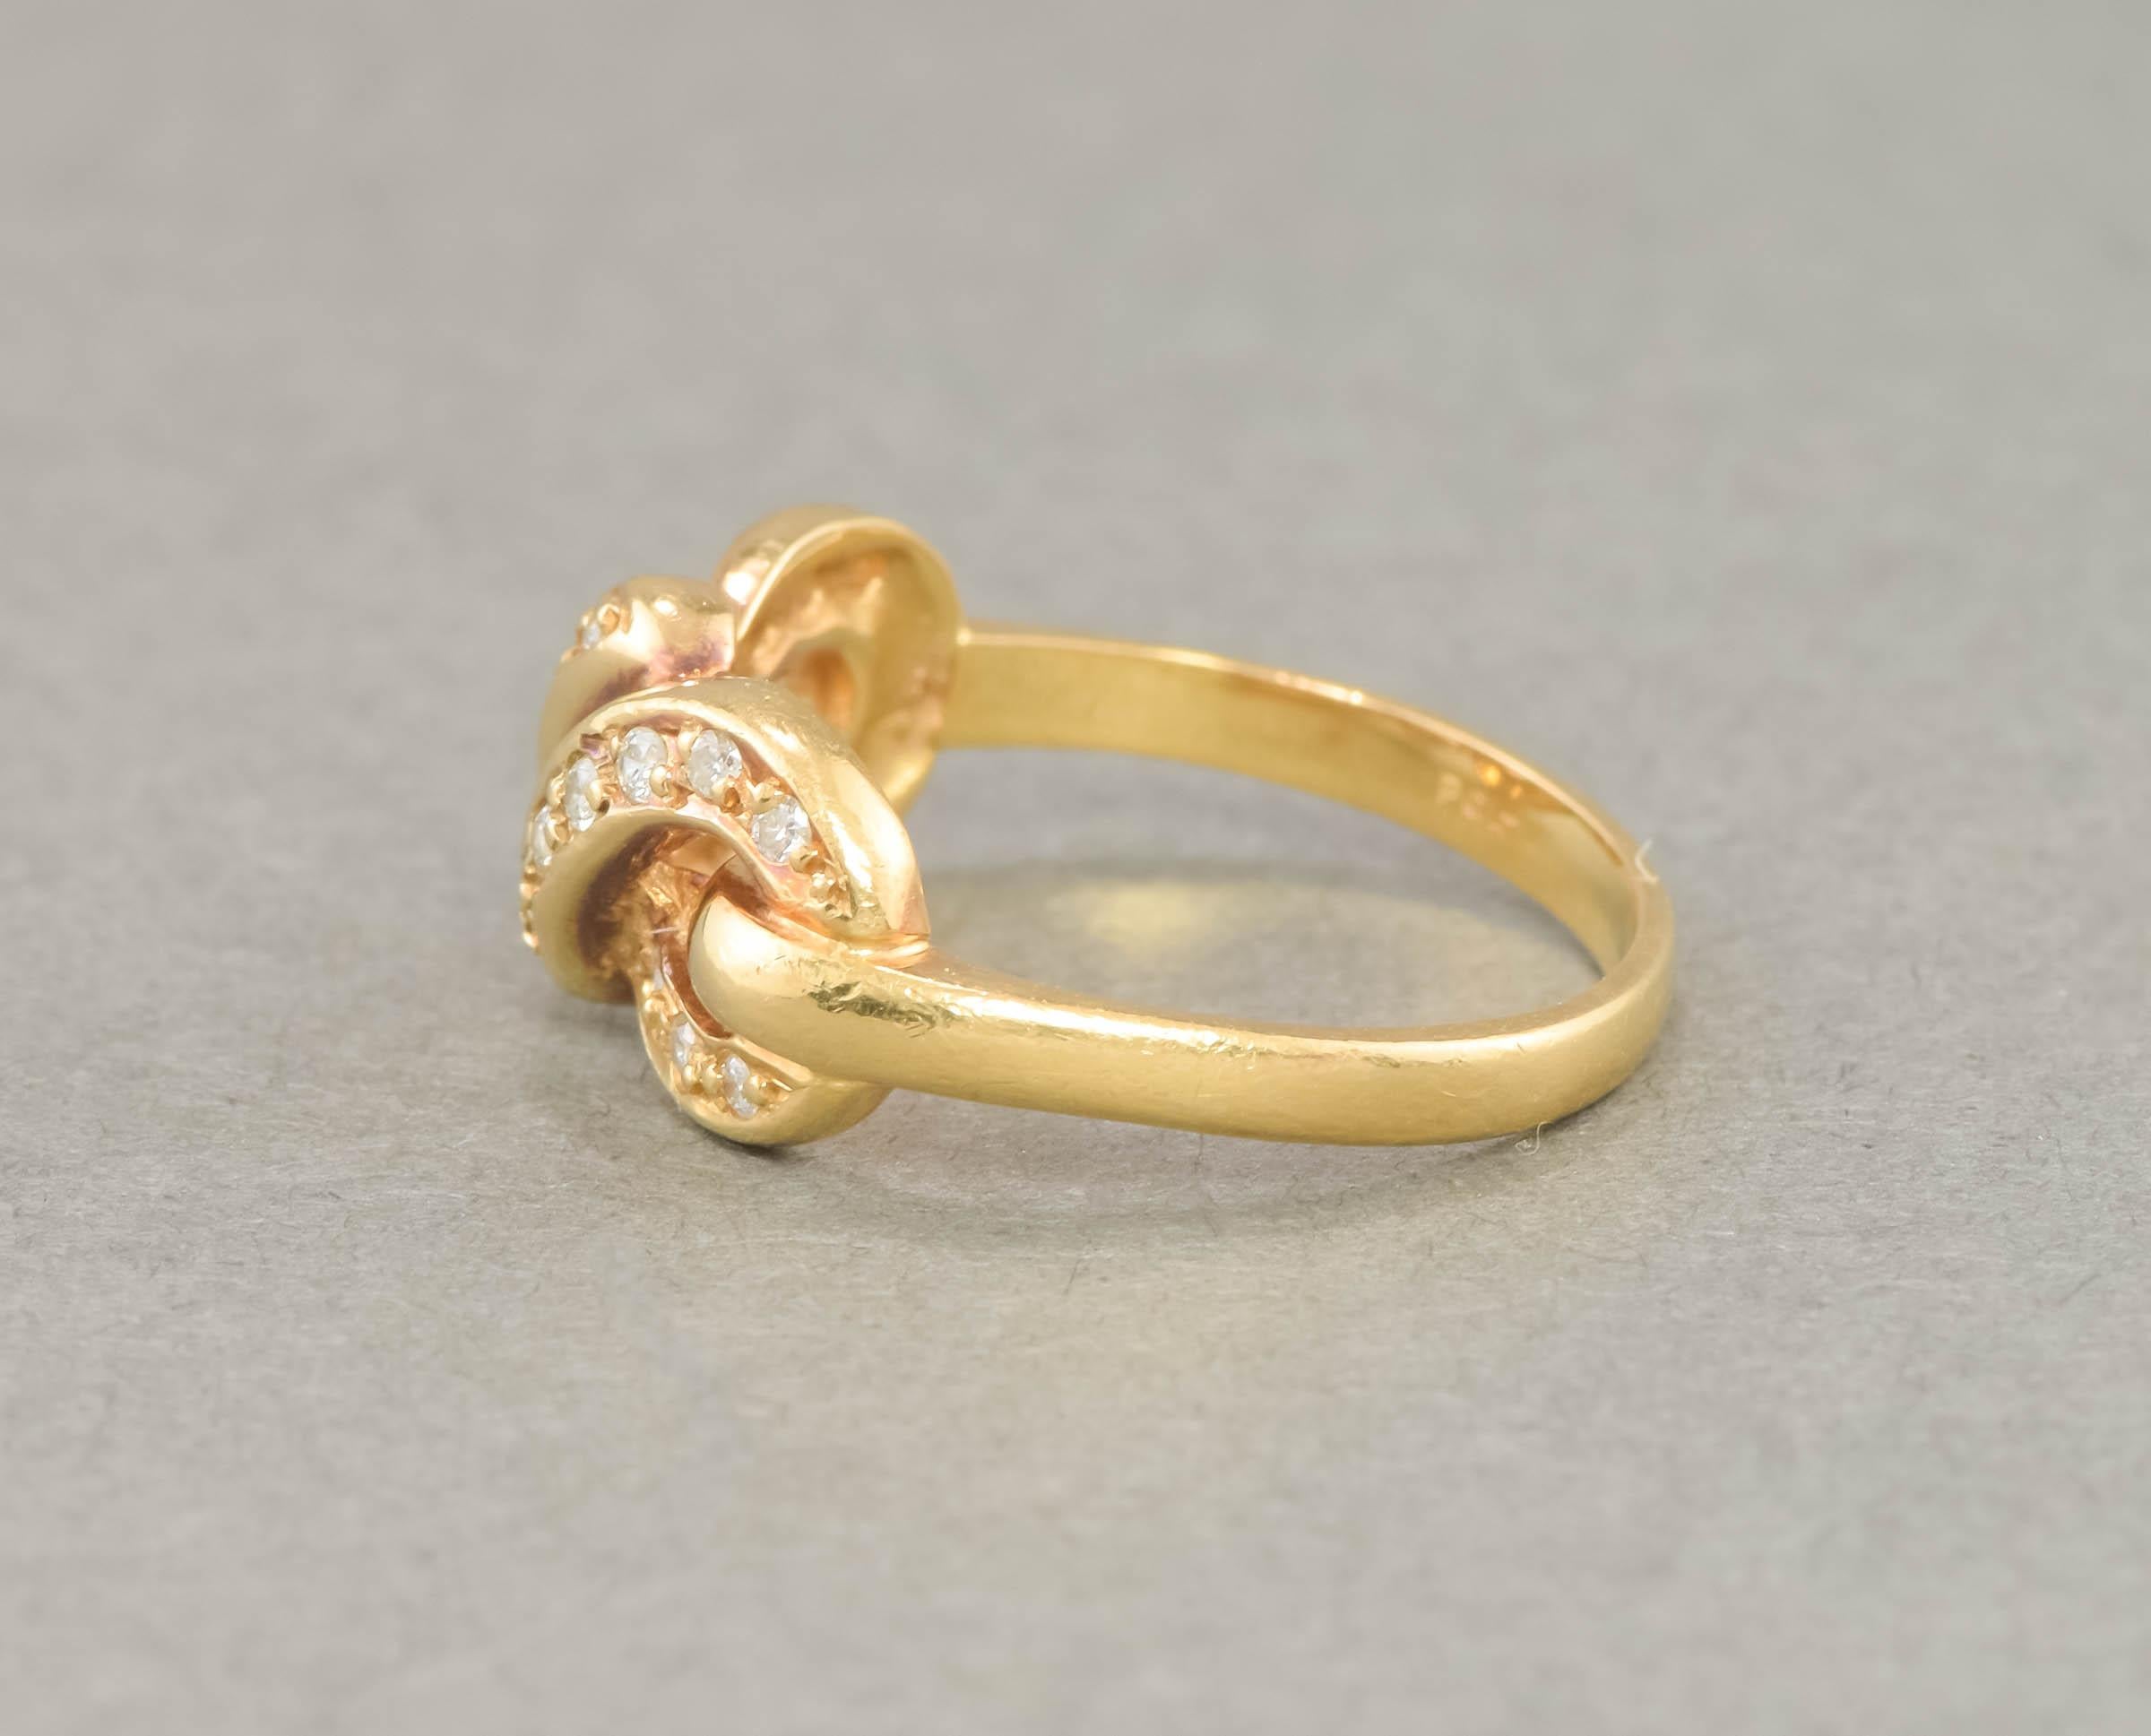 Brilliant Cut Vintage 18K Gold Diamond Infinity Love Knot Ring, Hallmarked 1985 For Sale